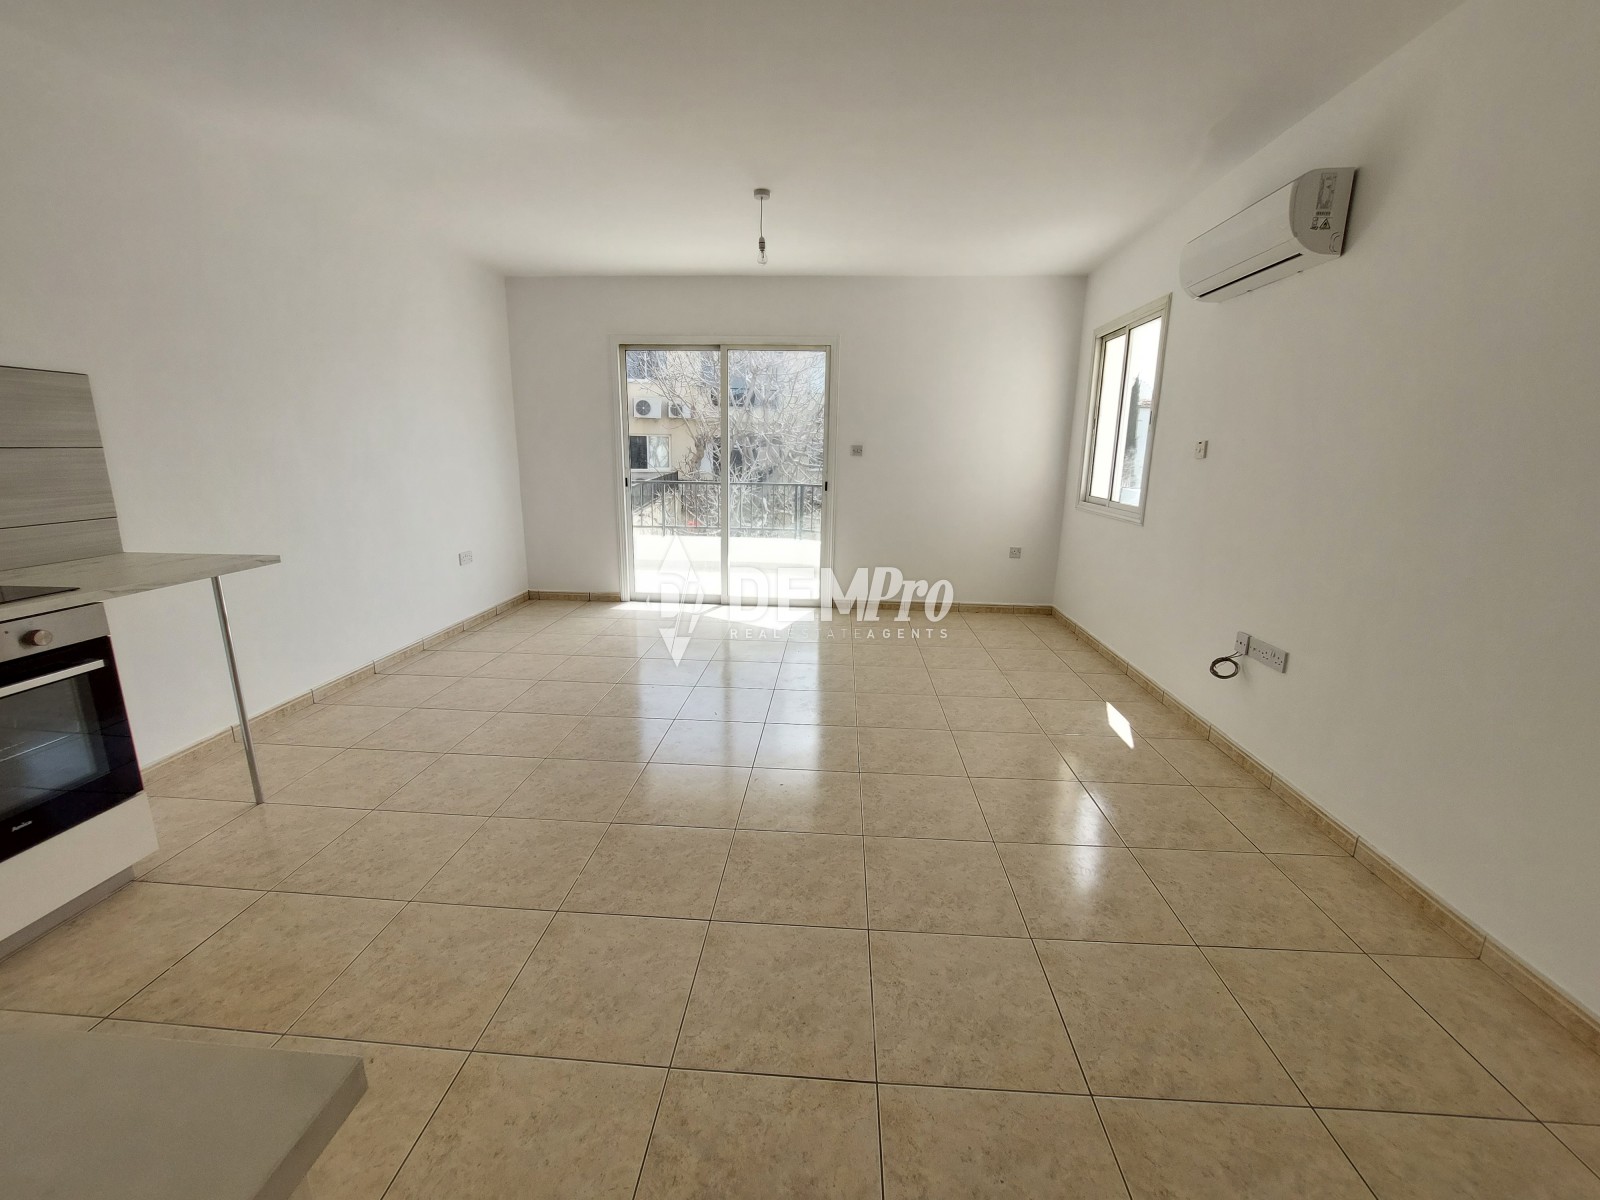 1 Bedroom Apartment for Sale in Peyia, Paphos District